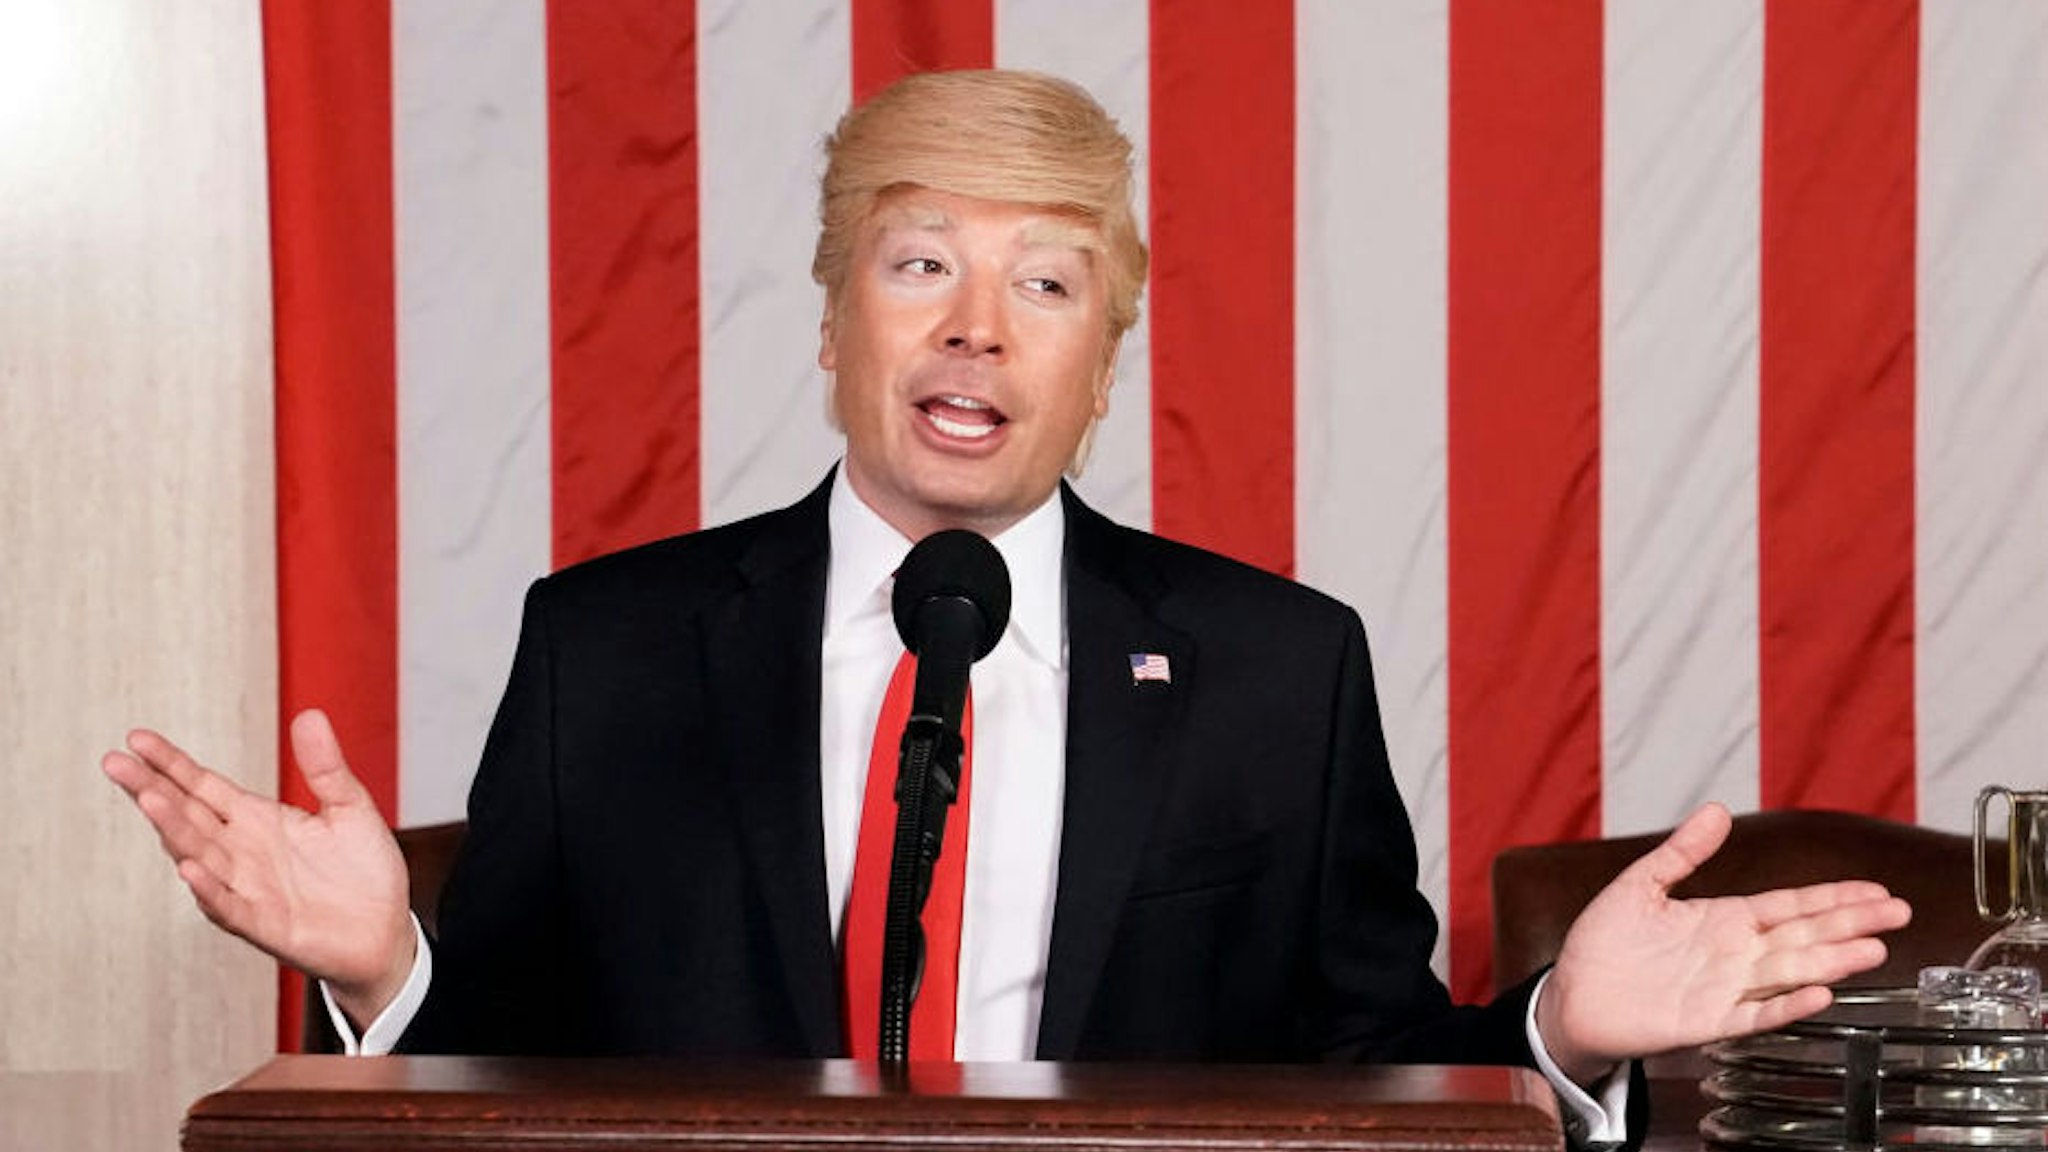 Jimmy Fallon as Donald Trump during "Trump's State of the Union First Draft" on February 5, 2020 -- (Photo by: Andrew Lipovsky/NBC/NBCU Photo Bank via Getty Images)